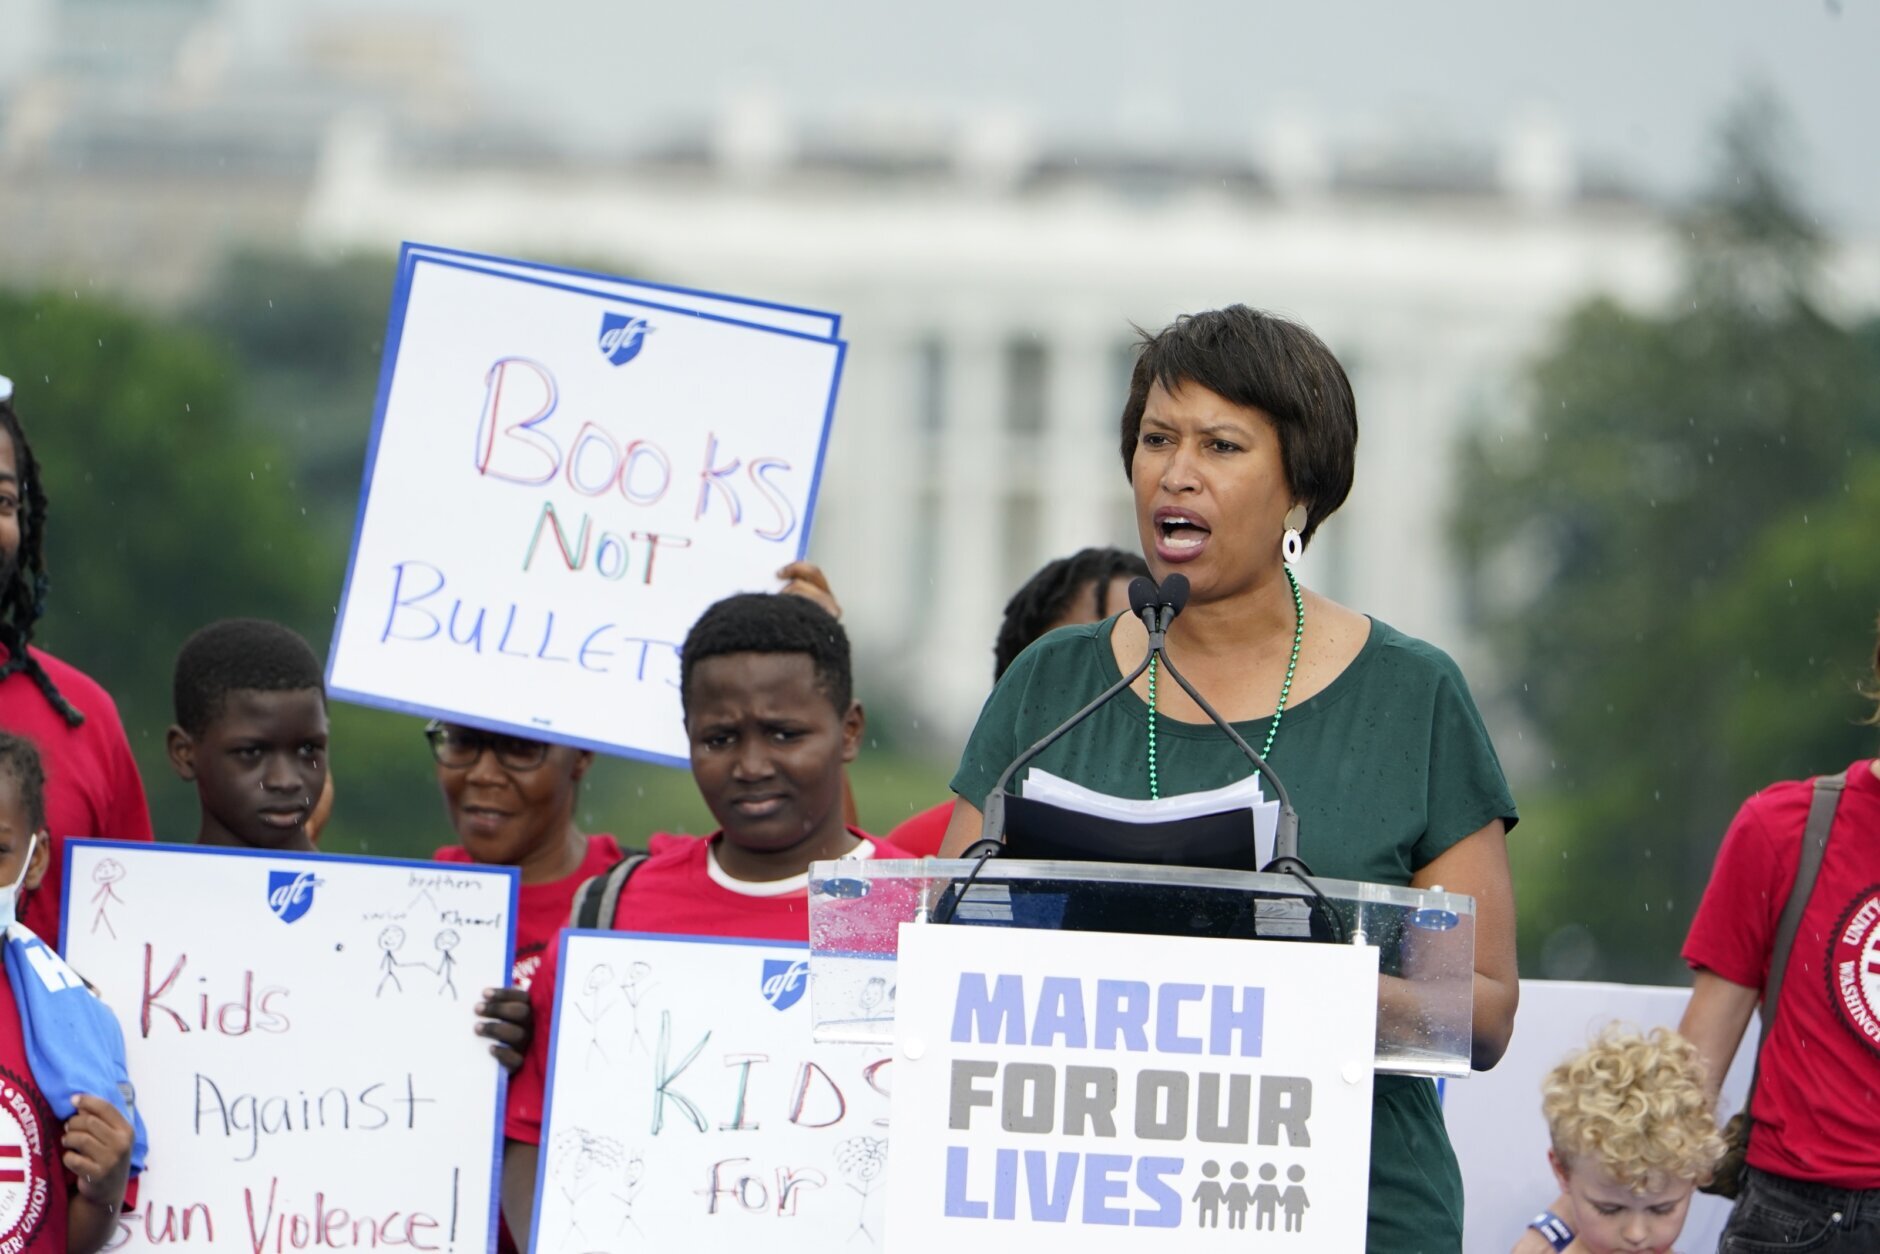 With the White House in the background, District of Columbia Mayor Muriel Bowser speaks during the second March for Our Lives rally in support of gun control, Saturday, June 11, 2022, in Washington. (AP Photo/Manuel Balce Ceneta)